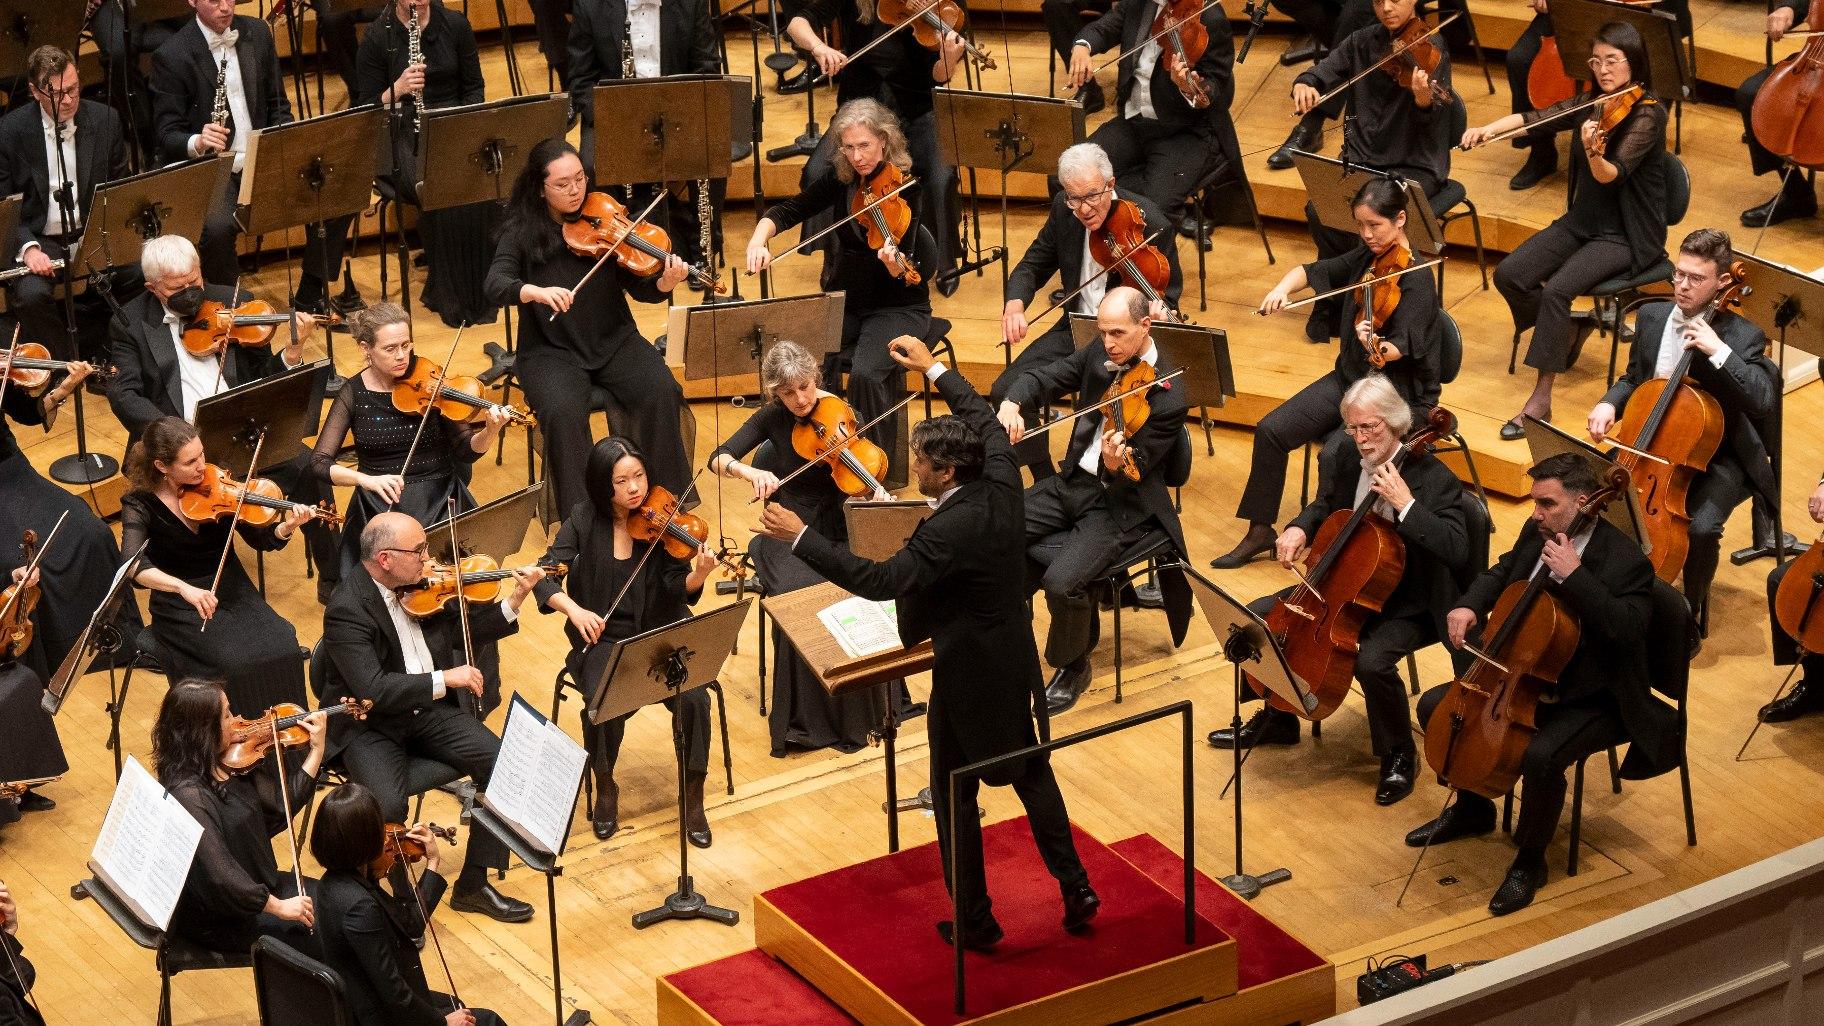 Guest conductor David Afkham leads the Chicago Symphony Orchestra in a program of works by Ravel, Shostakovich, and Debussy. (Credit: Todd Rosenberg)